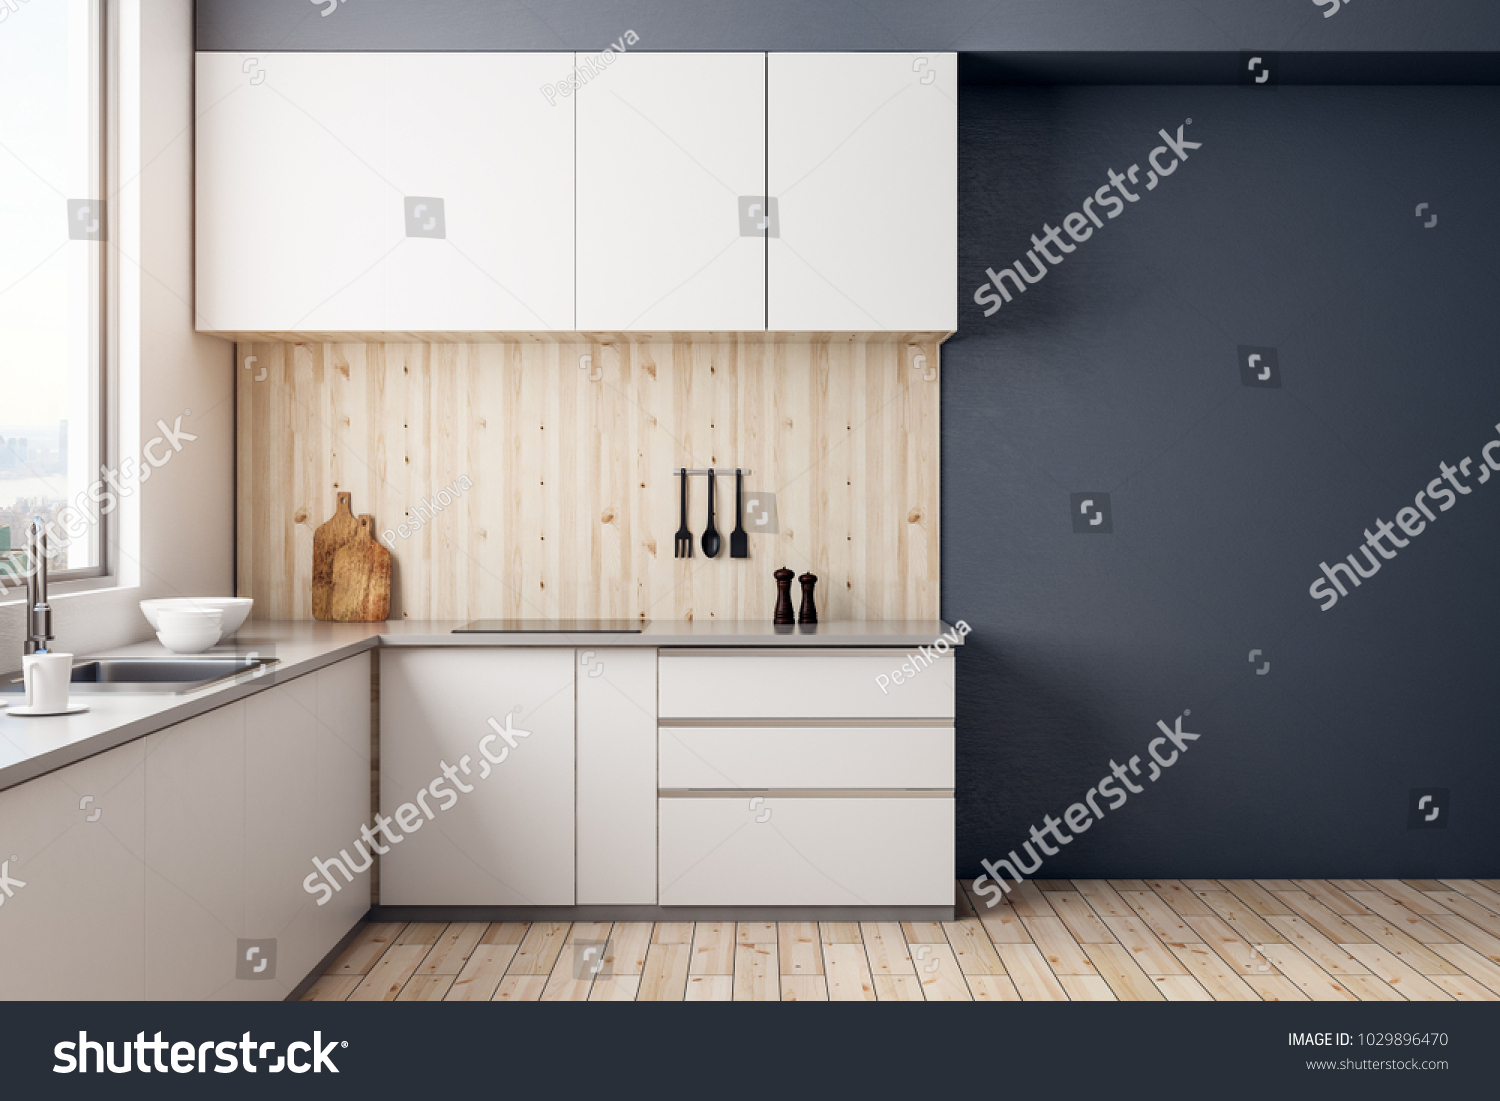 Stock Photo Modern Kitchen Room Interior With Copy Space On Wall And Daylight Mock Up D Rendering 1029896470 